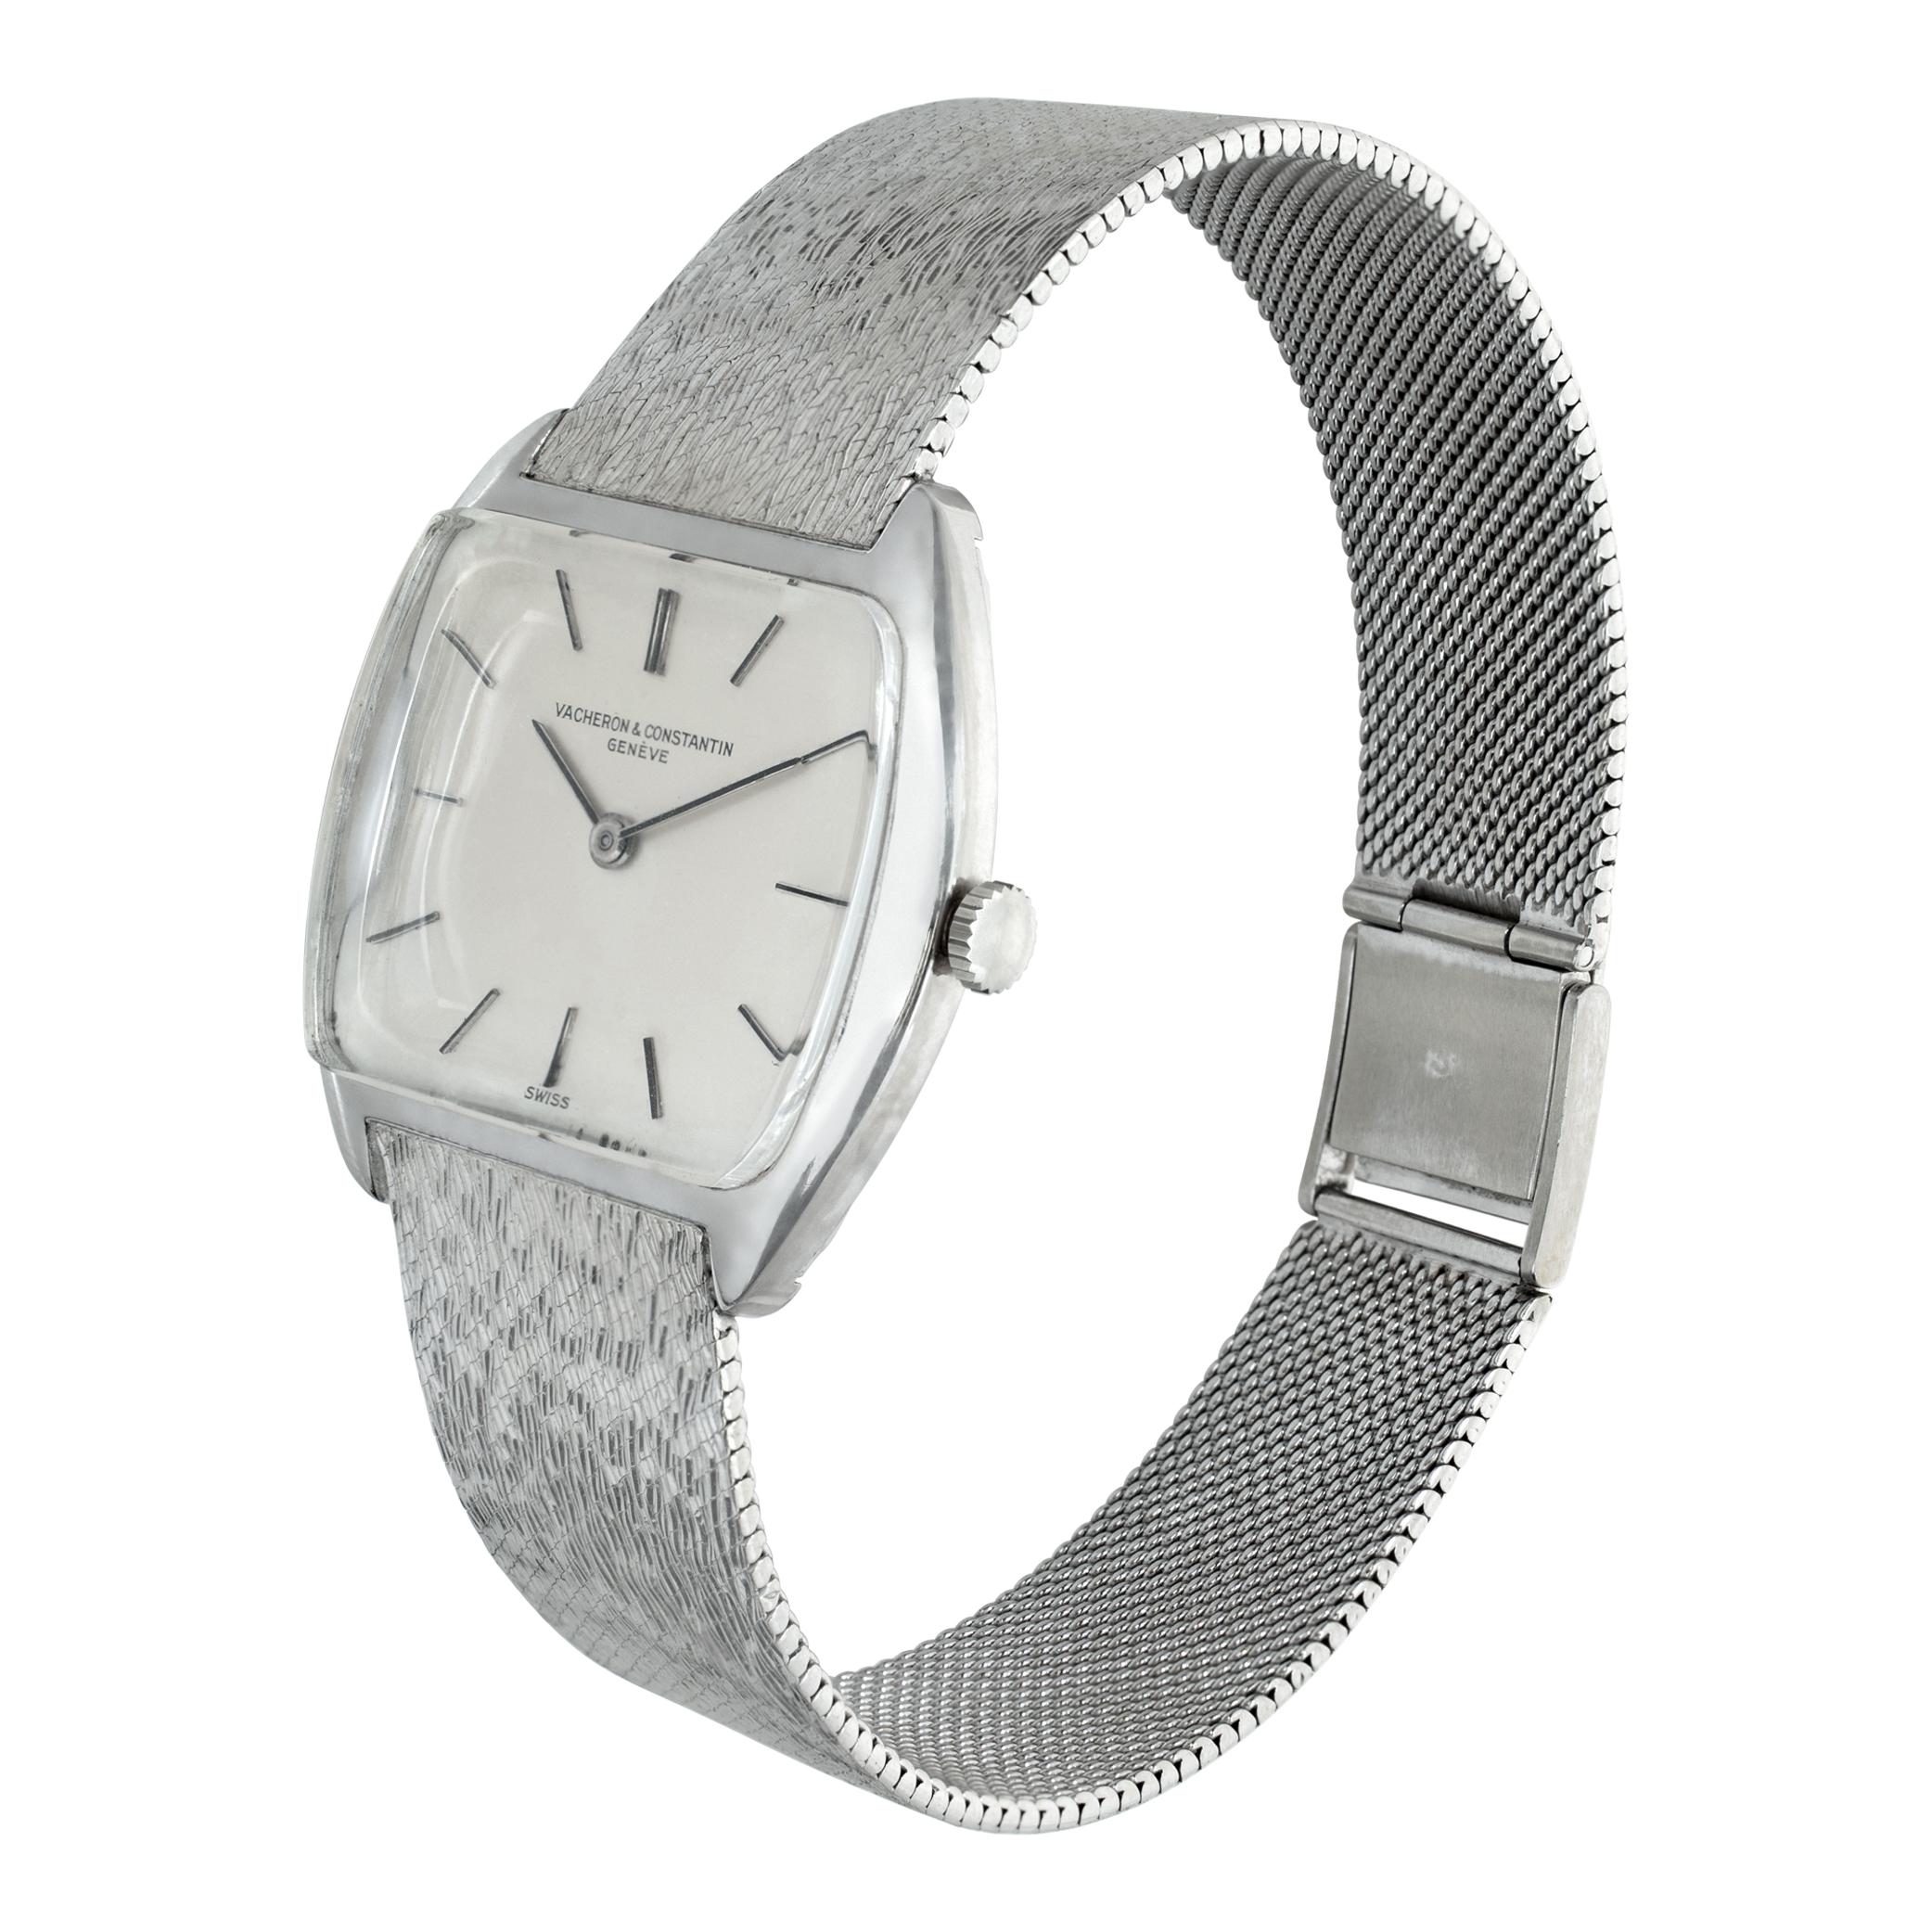 Vacheron Constantin Meister in 18k white gold on a mesh bracelet. Manual 18 jewel 5 adjusted position movement. 30 mm case size. Will fit a 7.75 inch wrist size. Ref 7253. Fine Pre-owned Vacheron Constantin Watch.

 Certified preowned Dress Vacheron